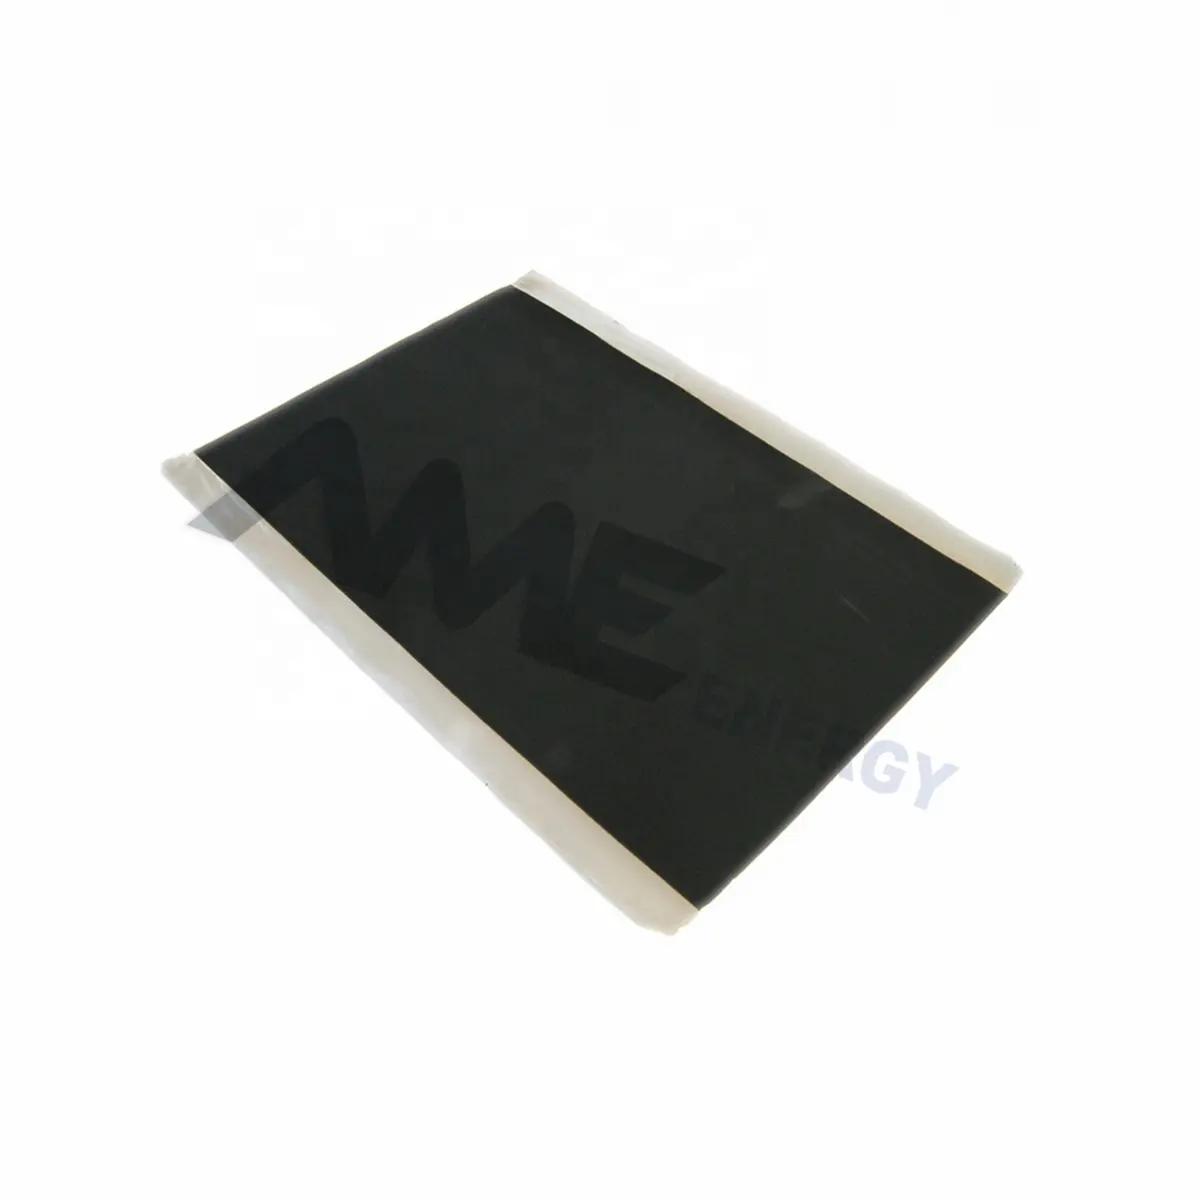 Al foil coated by LFP/LCO/NMC/LMO,etc for Lithium battery cathode electrode